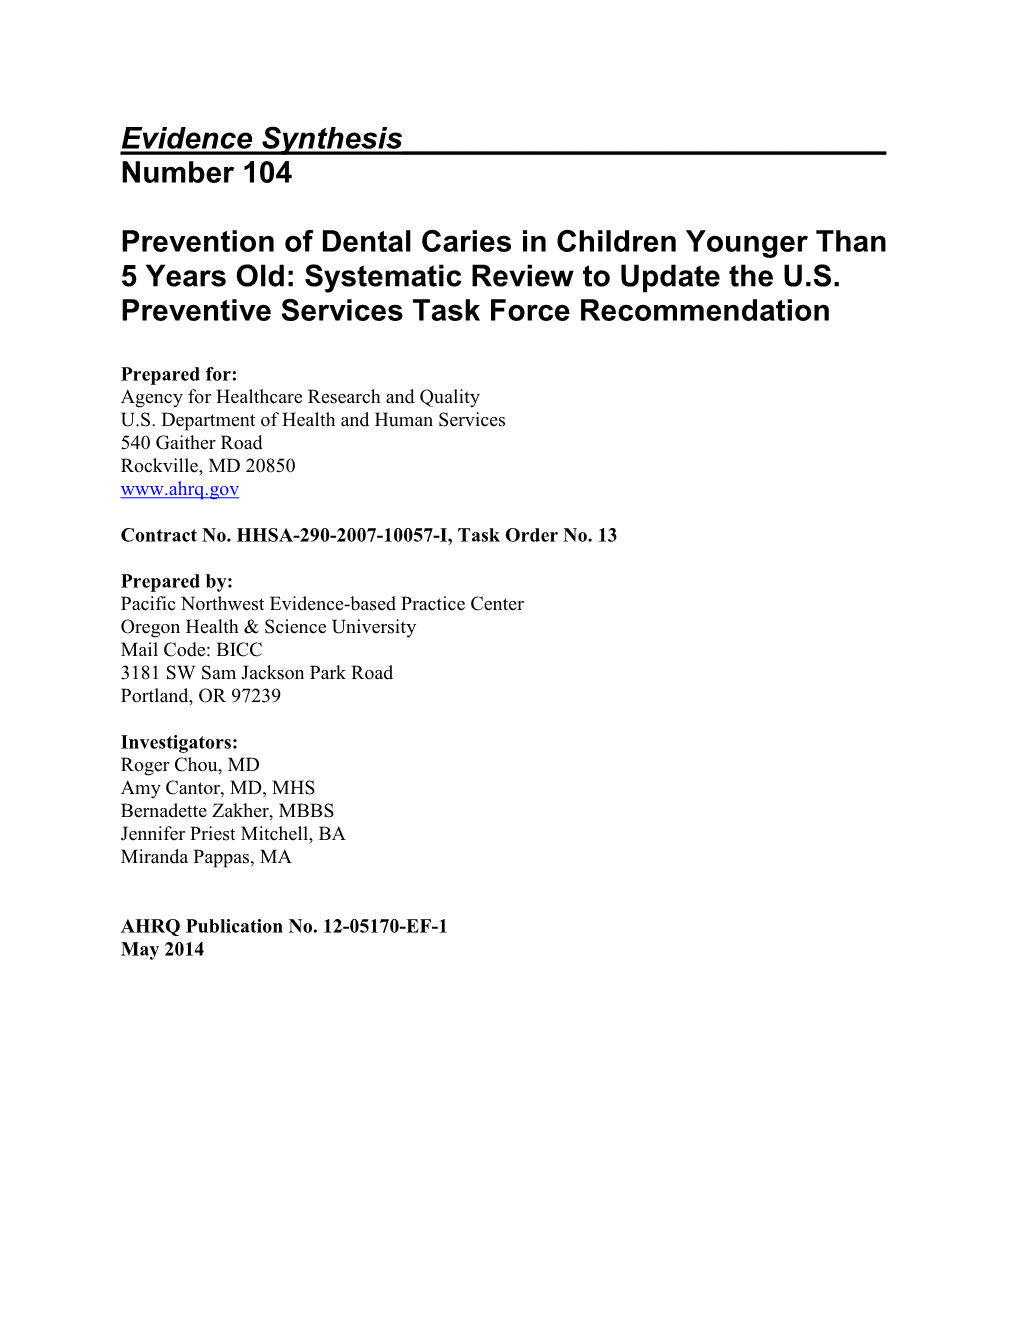 Prevention of Dental Caries in Children Younger Than 5 Years Old: Systematic Review to Update the U.S